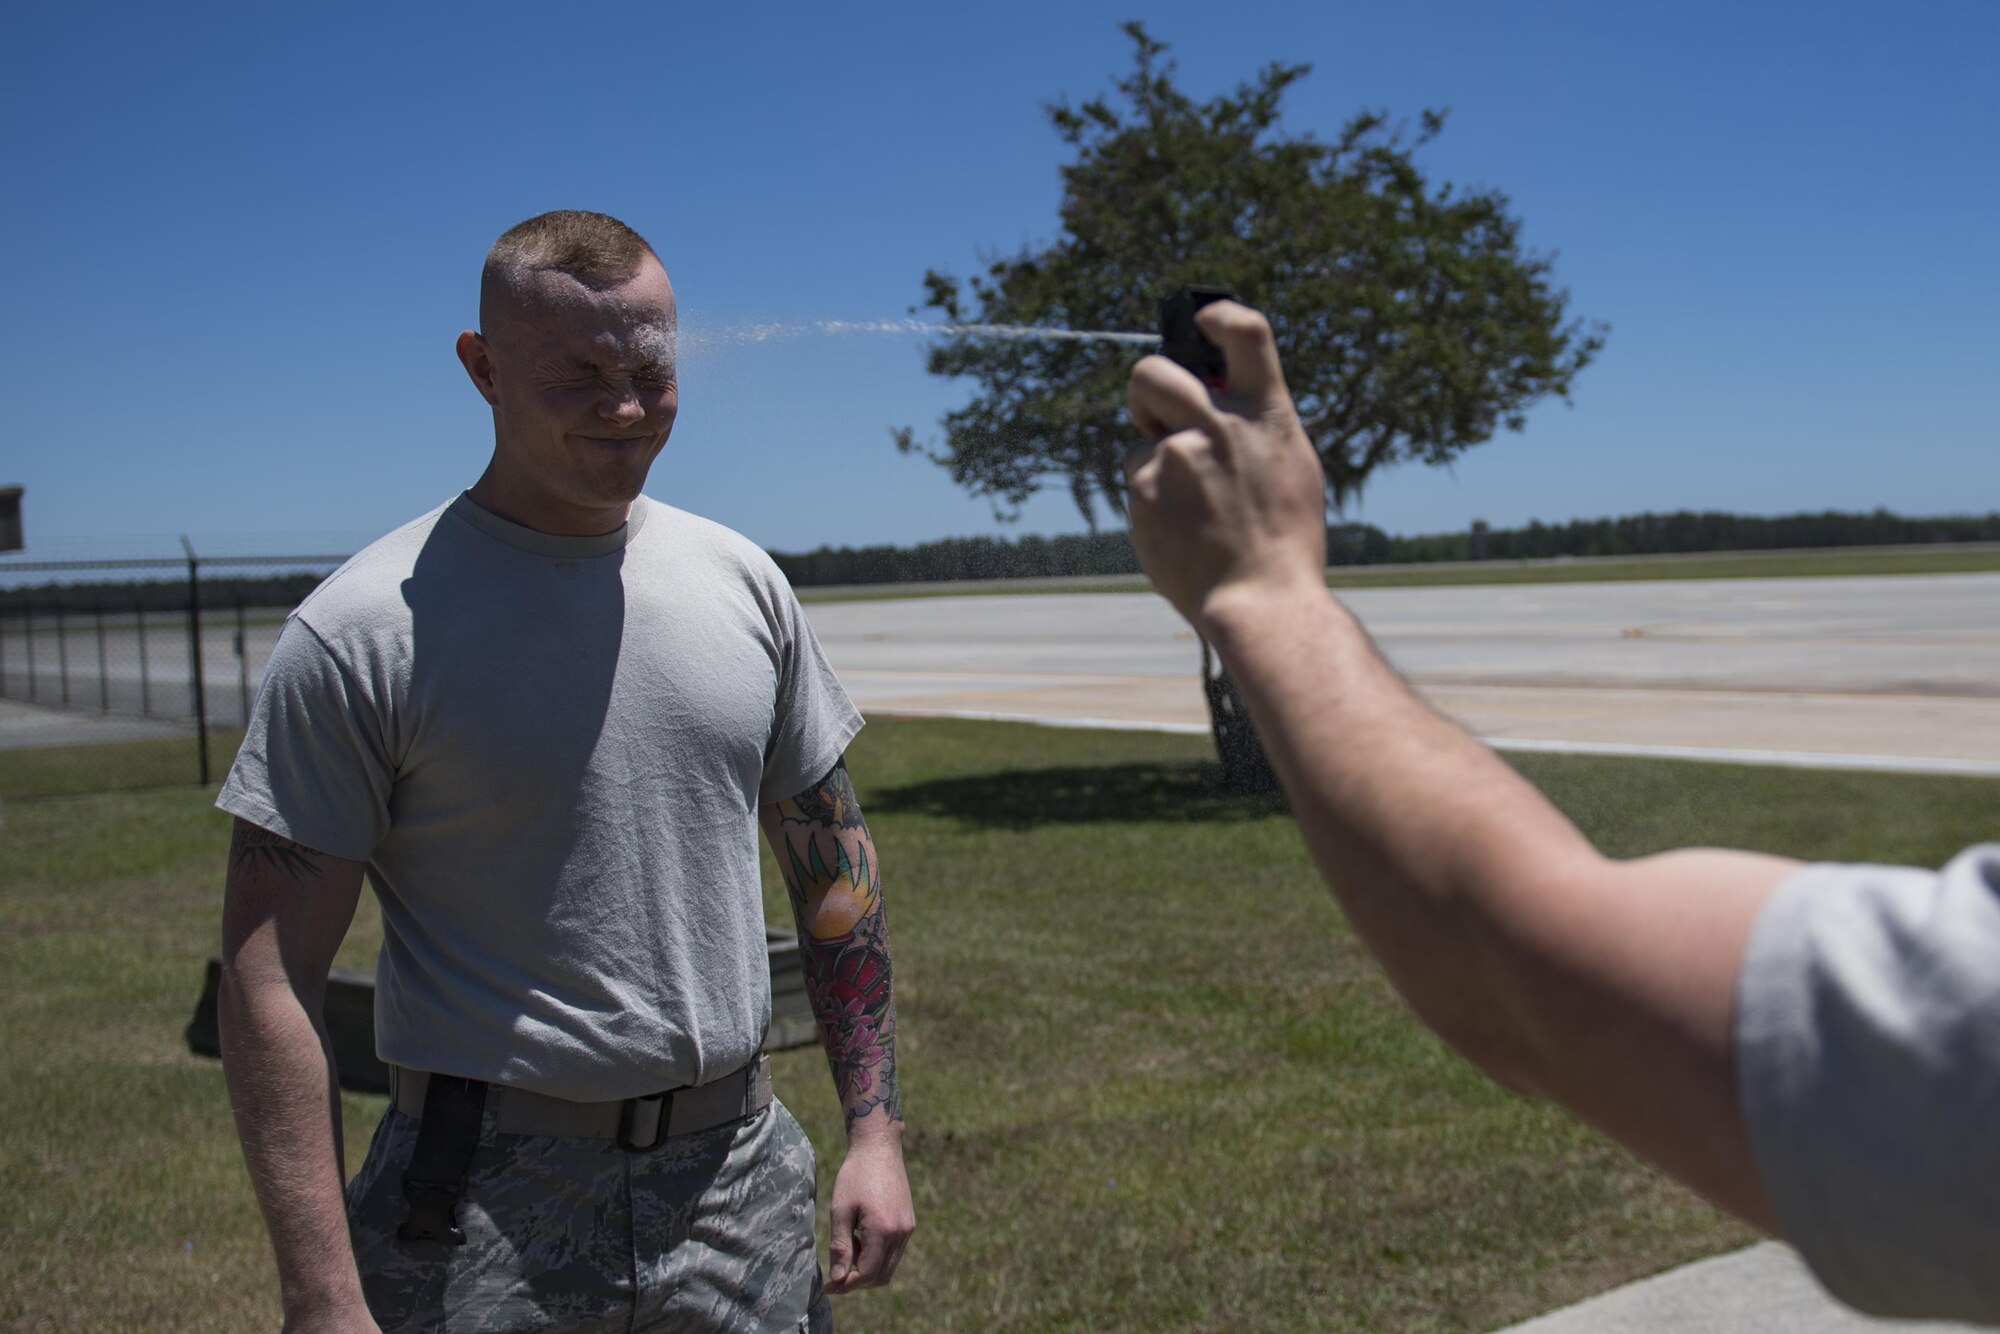 A unit trainer sprays Airman 1st Class Hunter Ogle, 23d Security Forces Squadron entry controller, in the face with oleoresin capsicum spray, also known as pepper spray, during an initial confidence course, May 2, 2017, at Moody Air Force Base, Ga. Airmen must complete a class then pass a physical confidence course while experiencing the effects of oleoresin capsicum spray to be qualified to carry the less-than-lethal tool. (Air Force photo by Airman 1st Class Daniel Snider)